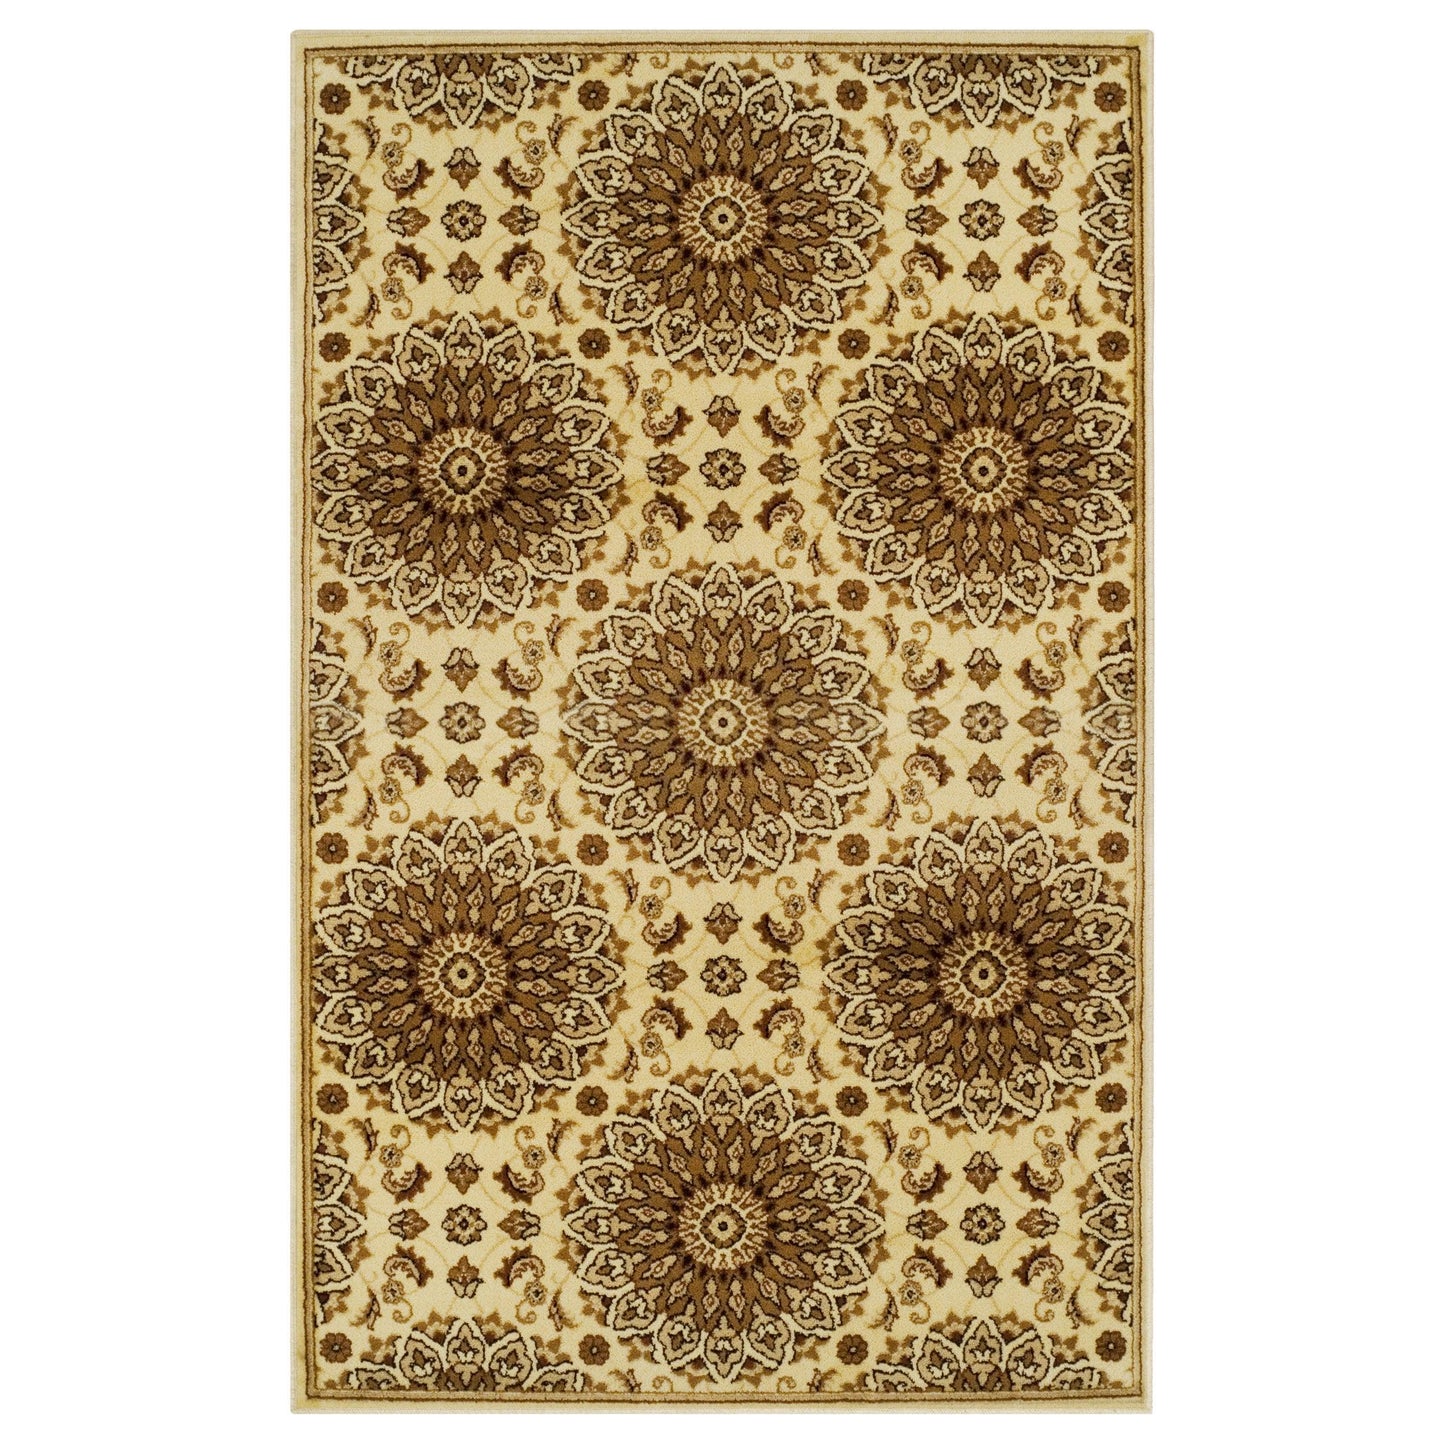 Marigold Vintage French Aubusson Design Floral Rug FredCo